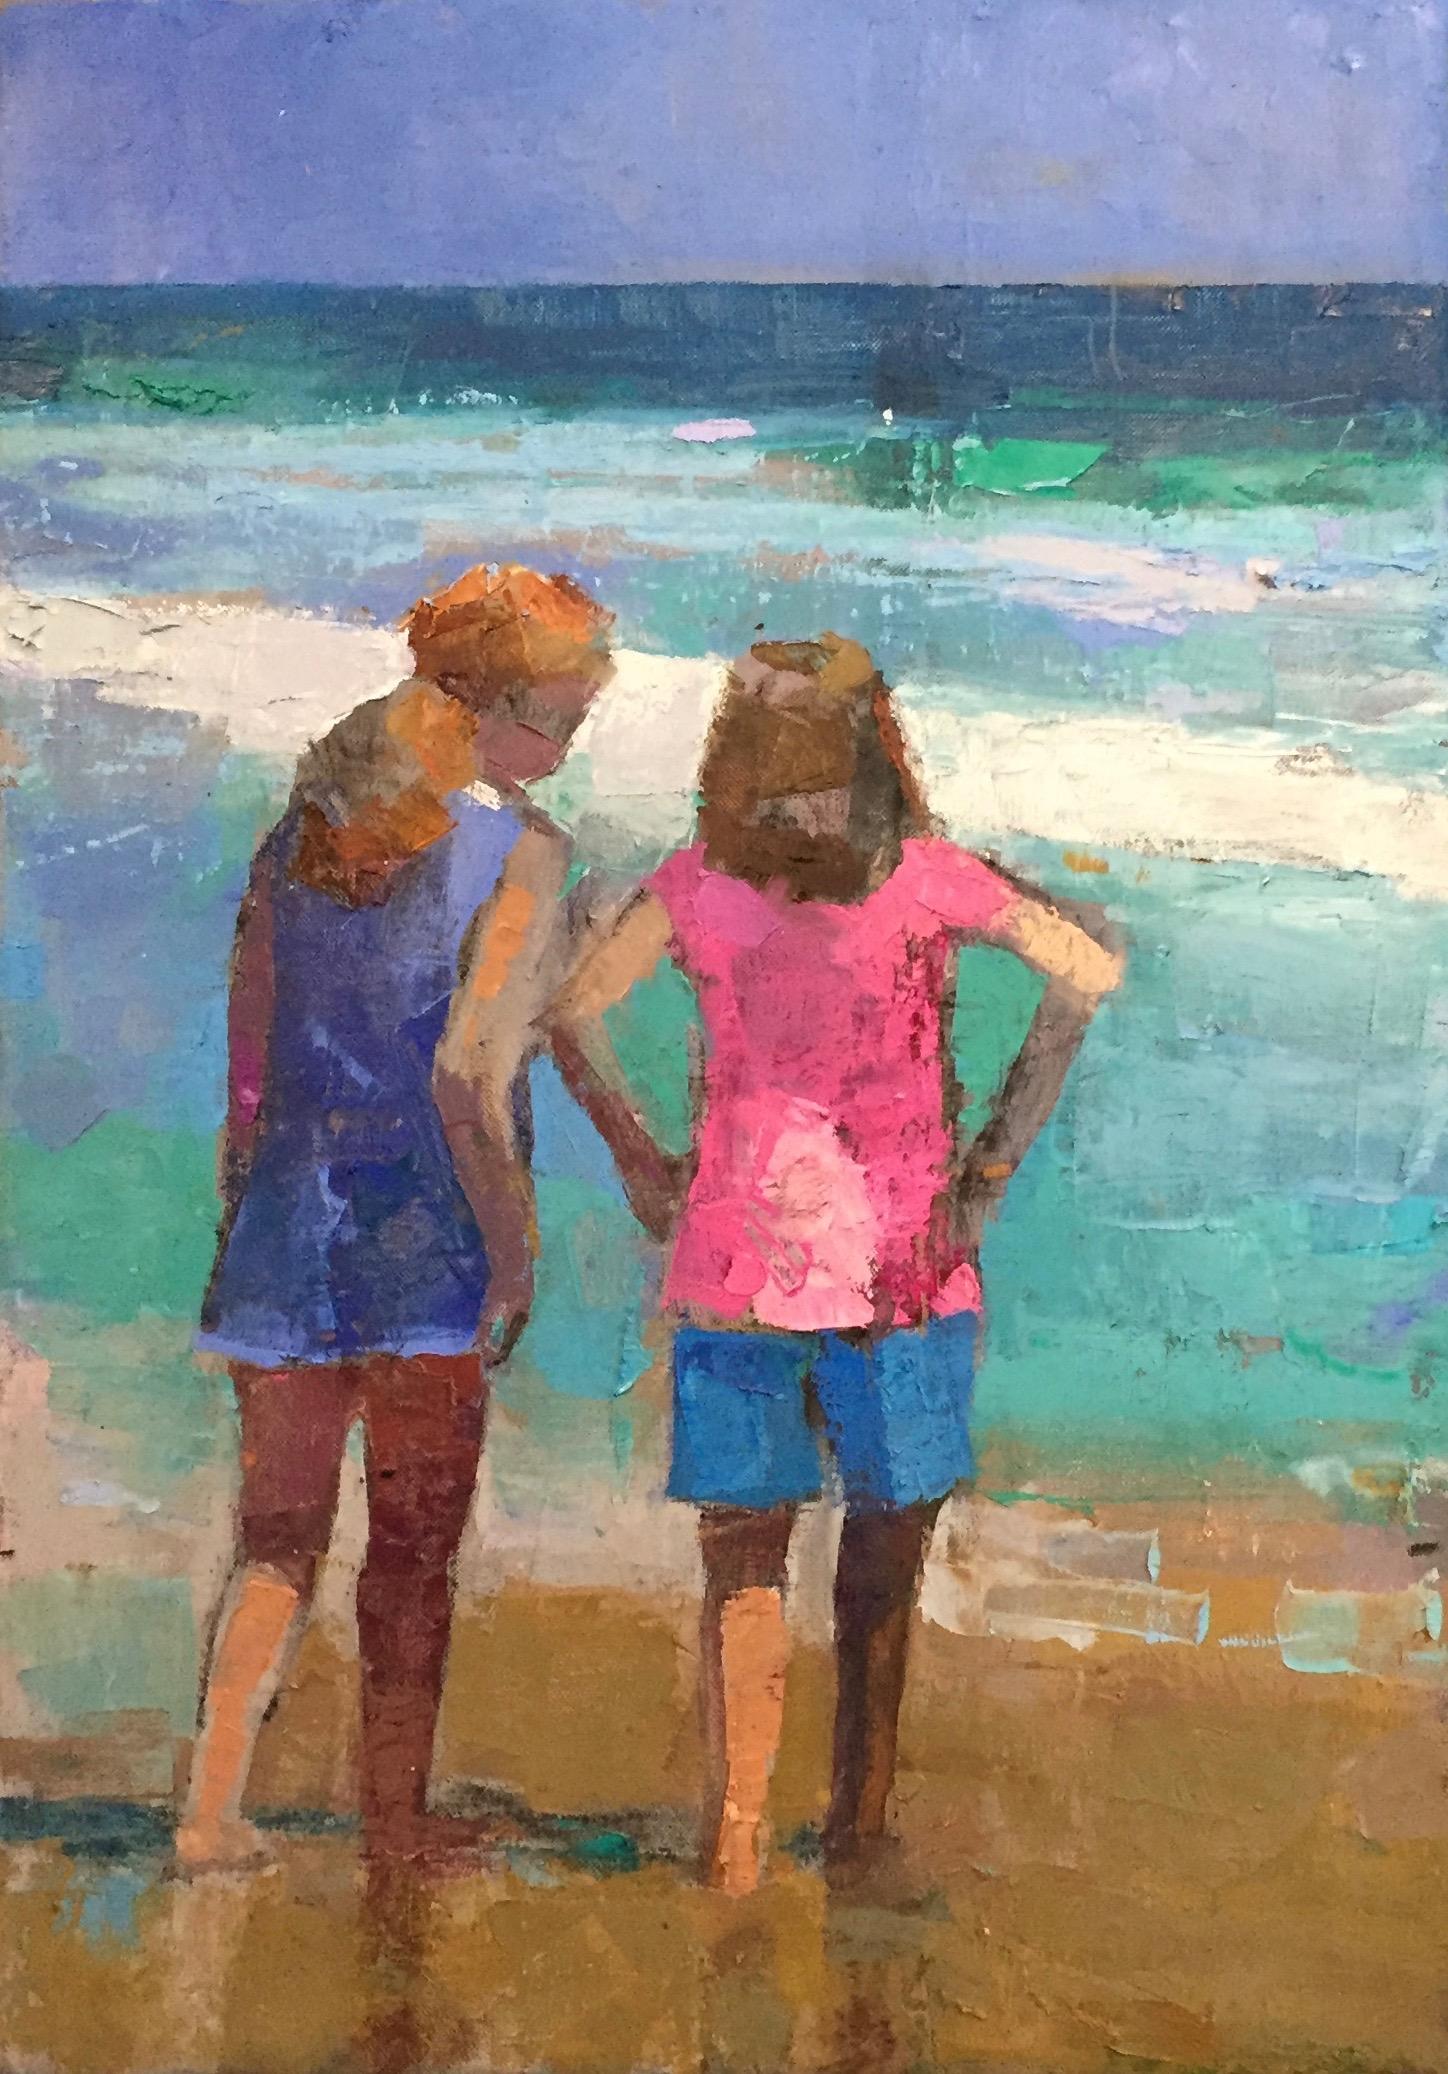 Larry Horowitz Figurative Painting - "Friends" oil painting of two girls standing by the ocean shore, back view